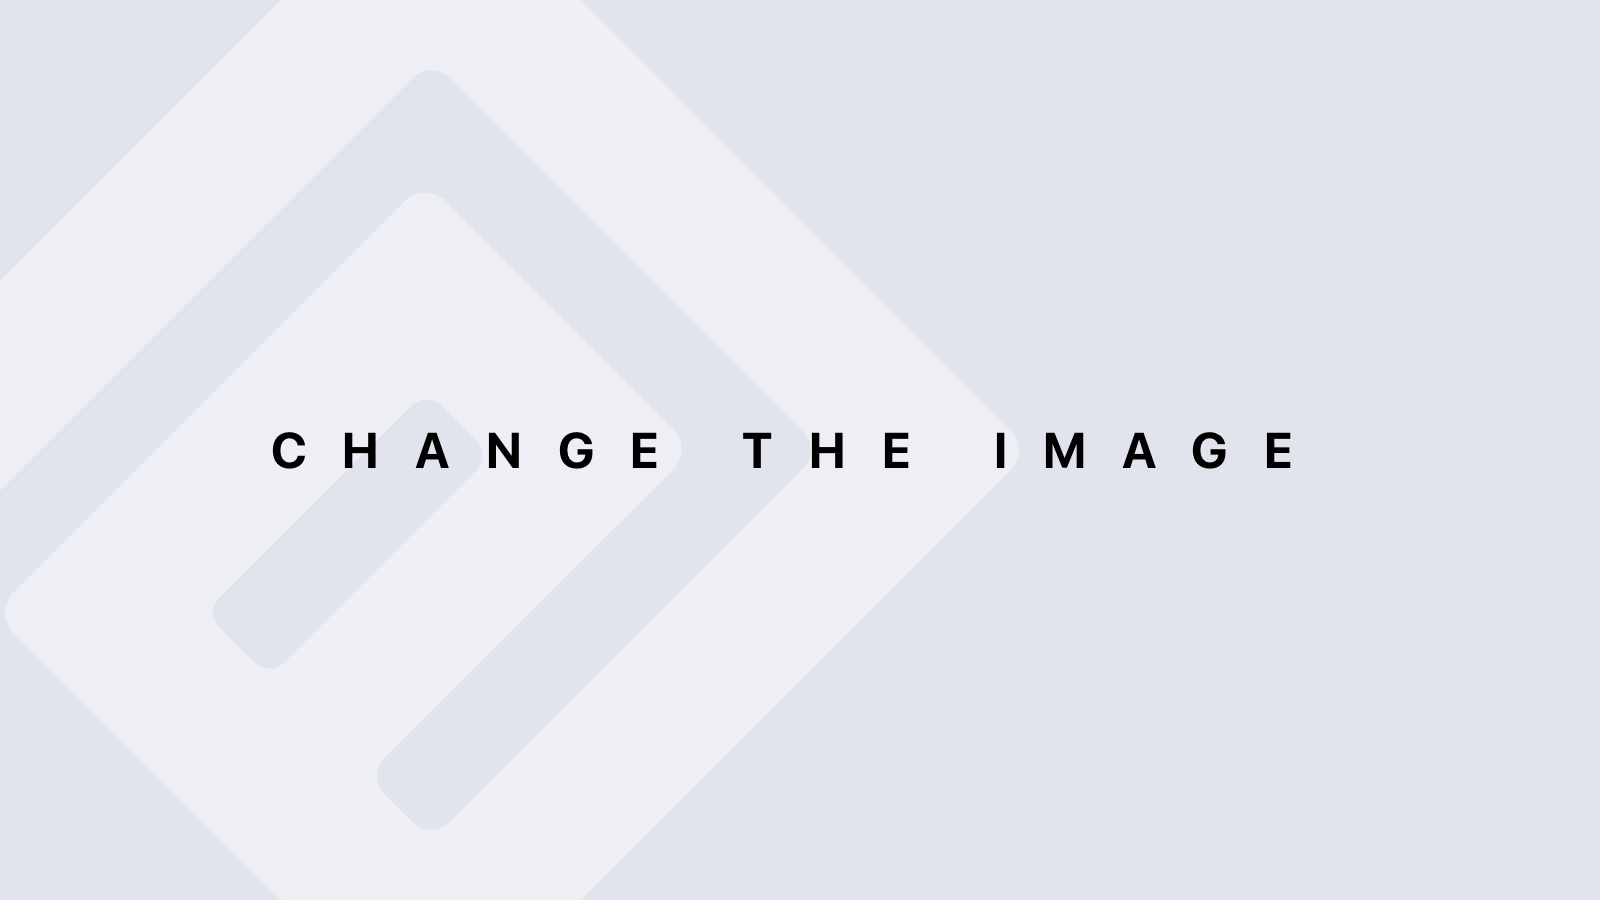 About image3